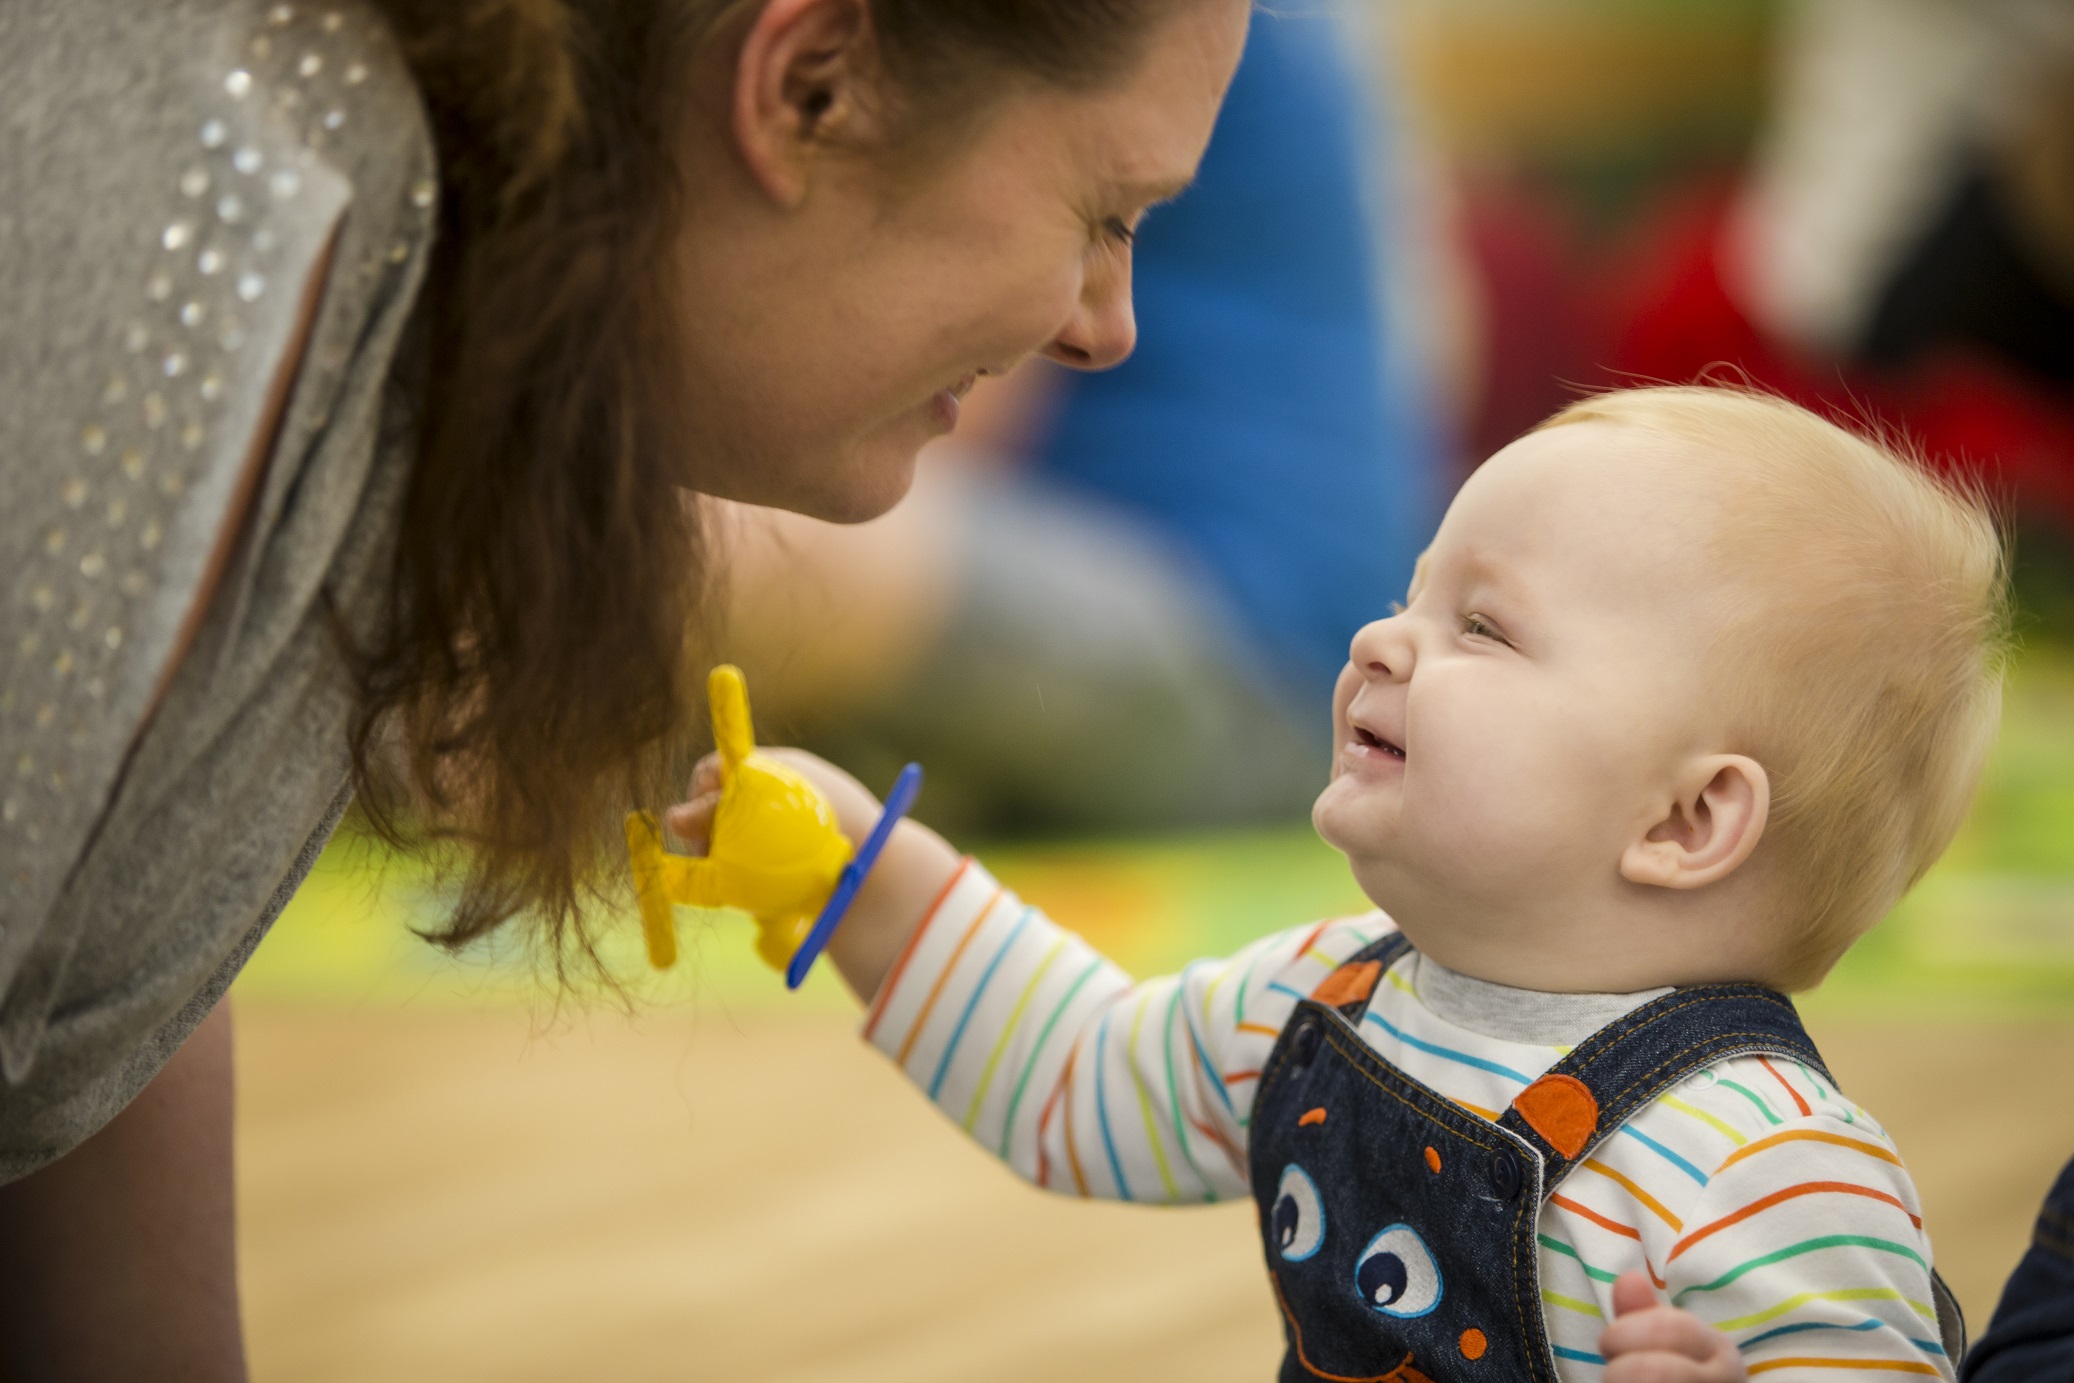 Parent and baby creating strong bonds through play